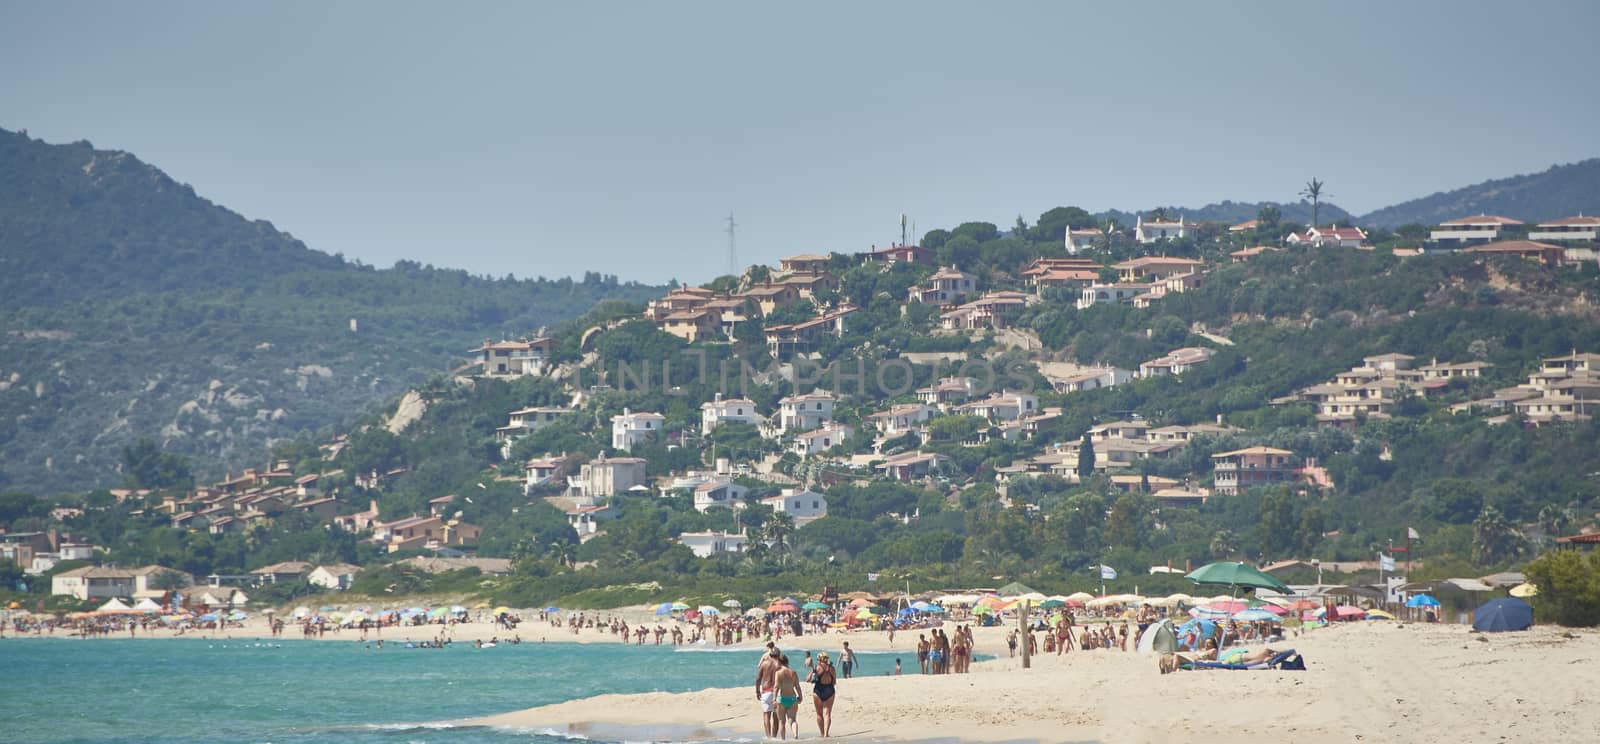 Image of the town of Costa Rei in Sardinia taken from the crowded beach during the daytime.